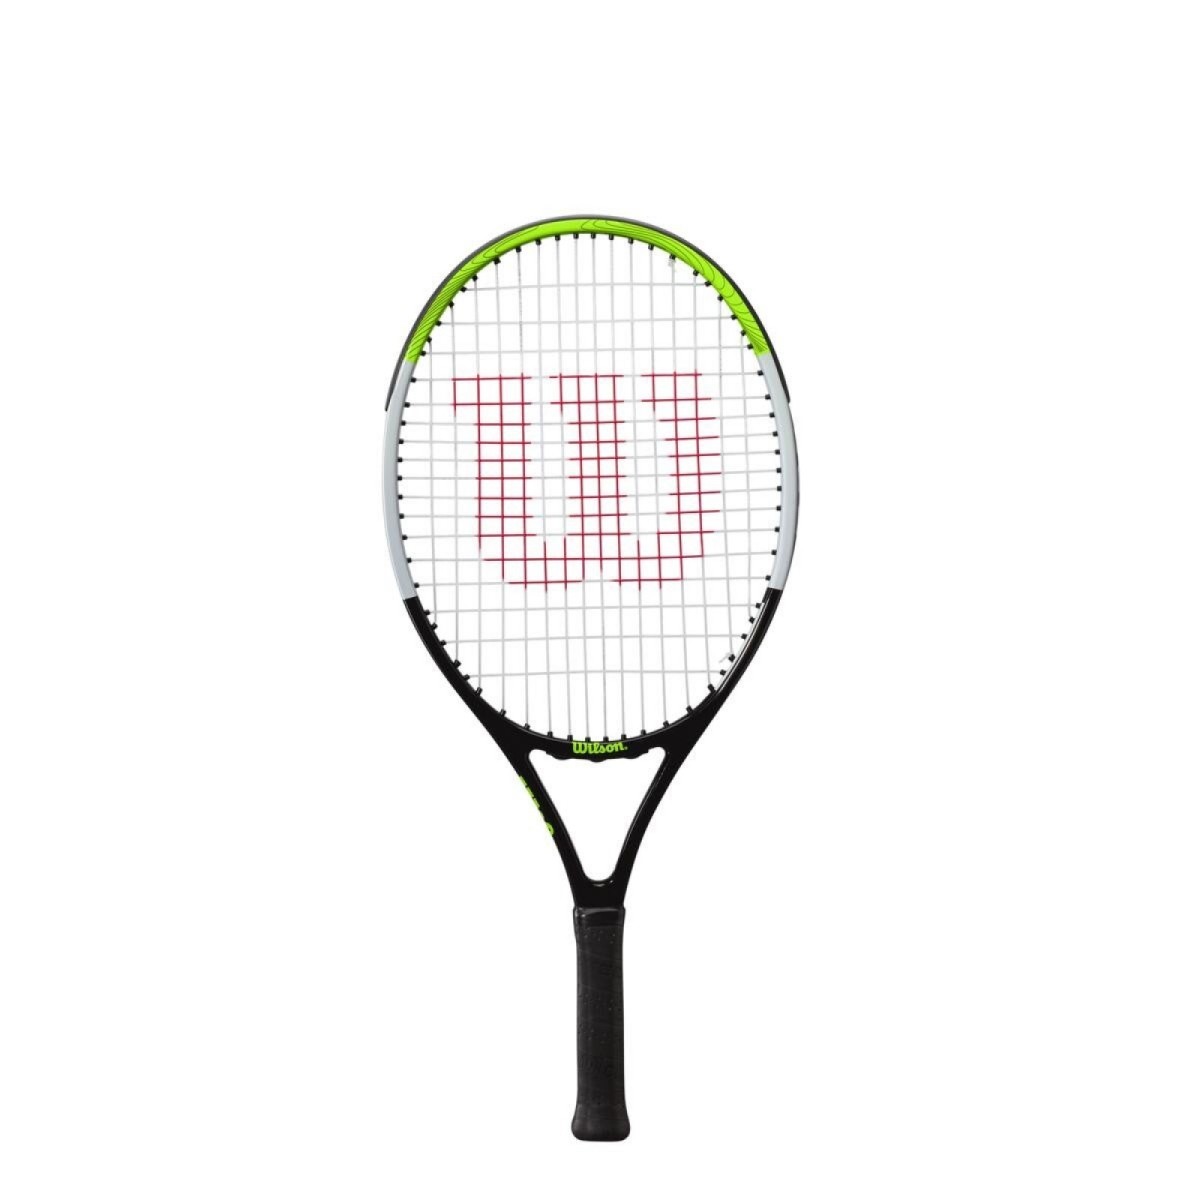 Wilson Blade Feel 23 Tennis Black / White / Green Inspired by performance Blade line, the Blade 23 appeals to developing juniors through a mix of playability, feel and